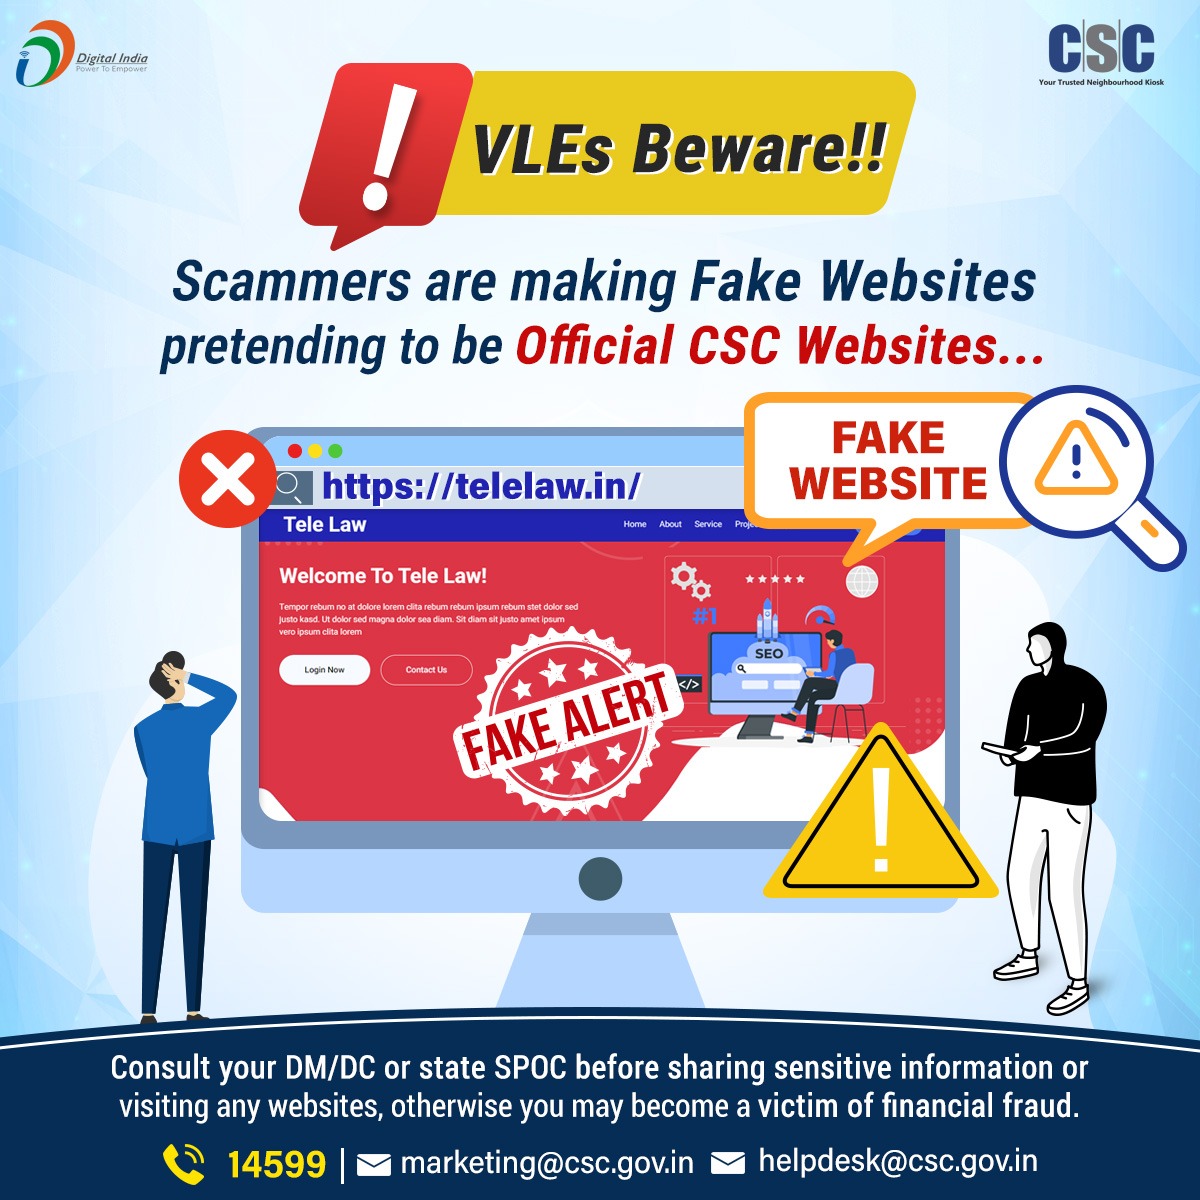 VLEs Beware! Scammers are making Fake Websites pretending to be Official #CSC Websites. Consult DM/DC or state SPOC before sharing sensitive info or visiting websites, otherwise, you may become victim of financial fraud. For queries, write to helpdesk@csc.gov.in or call 14599.